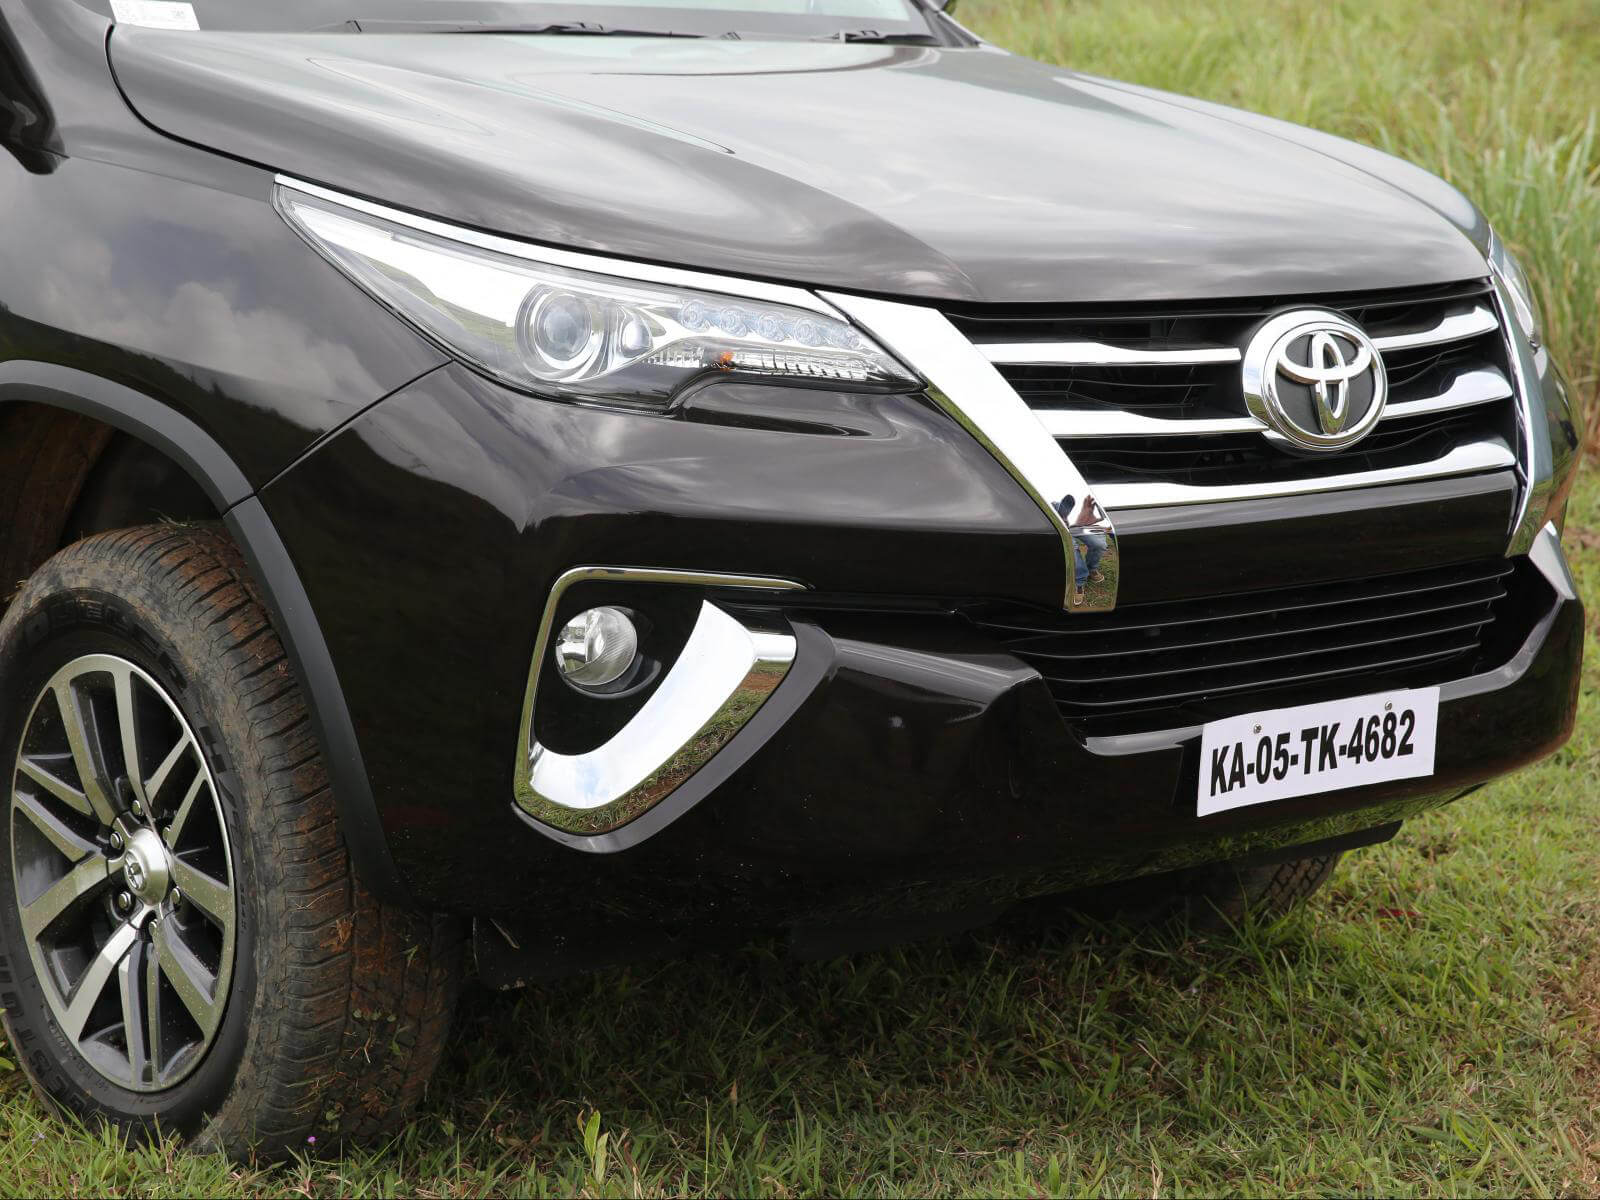 Toyota Fortuner Wallpaper For Iphone